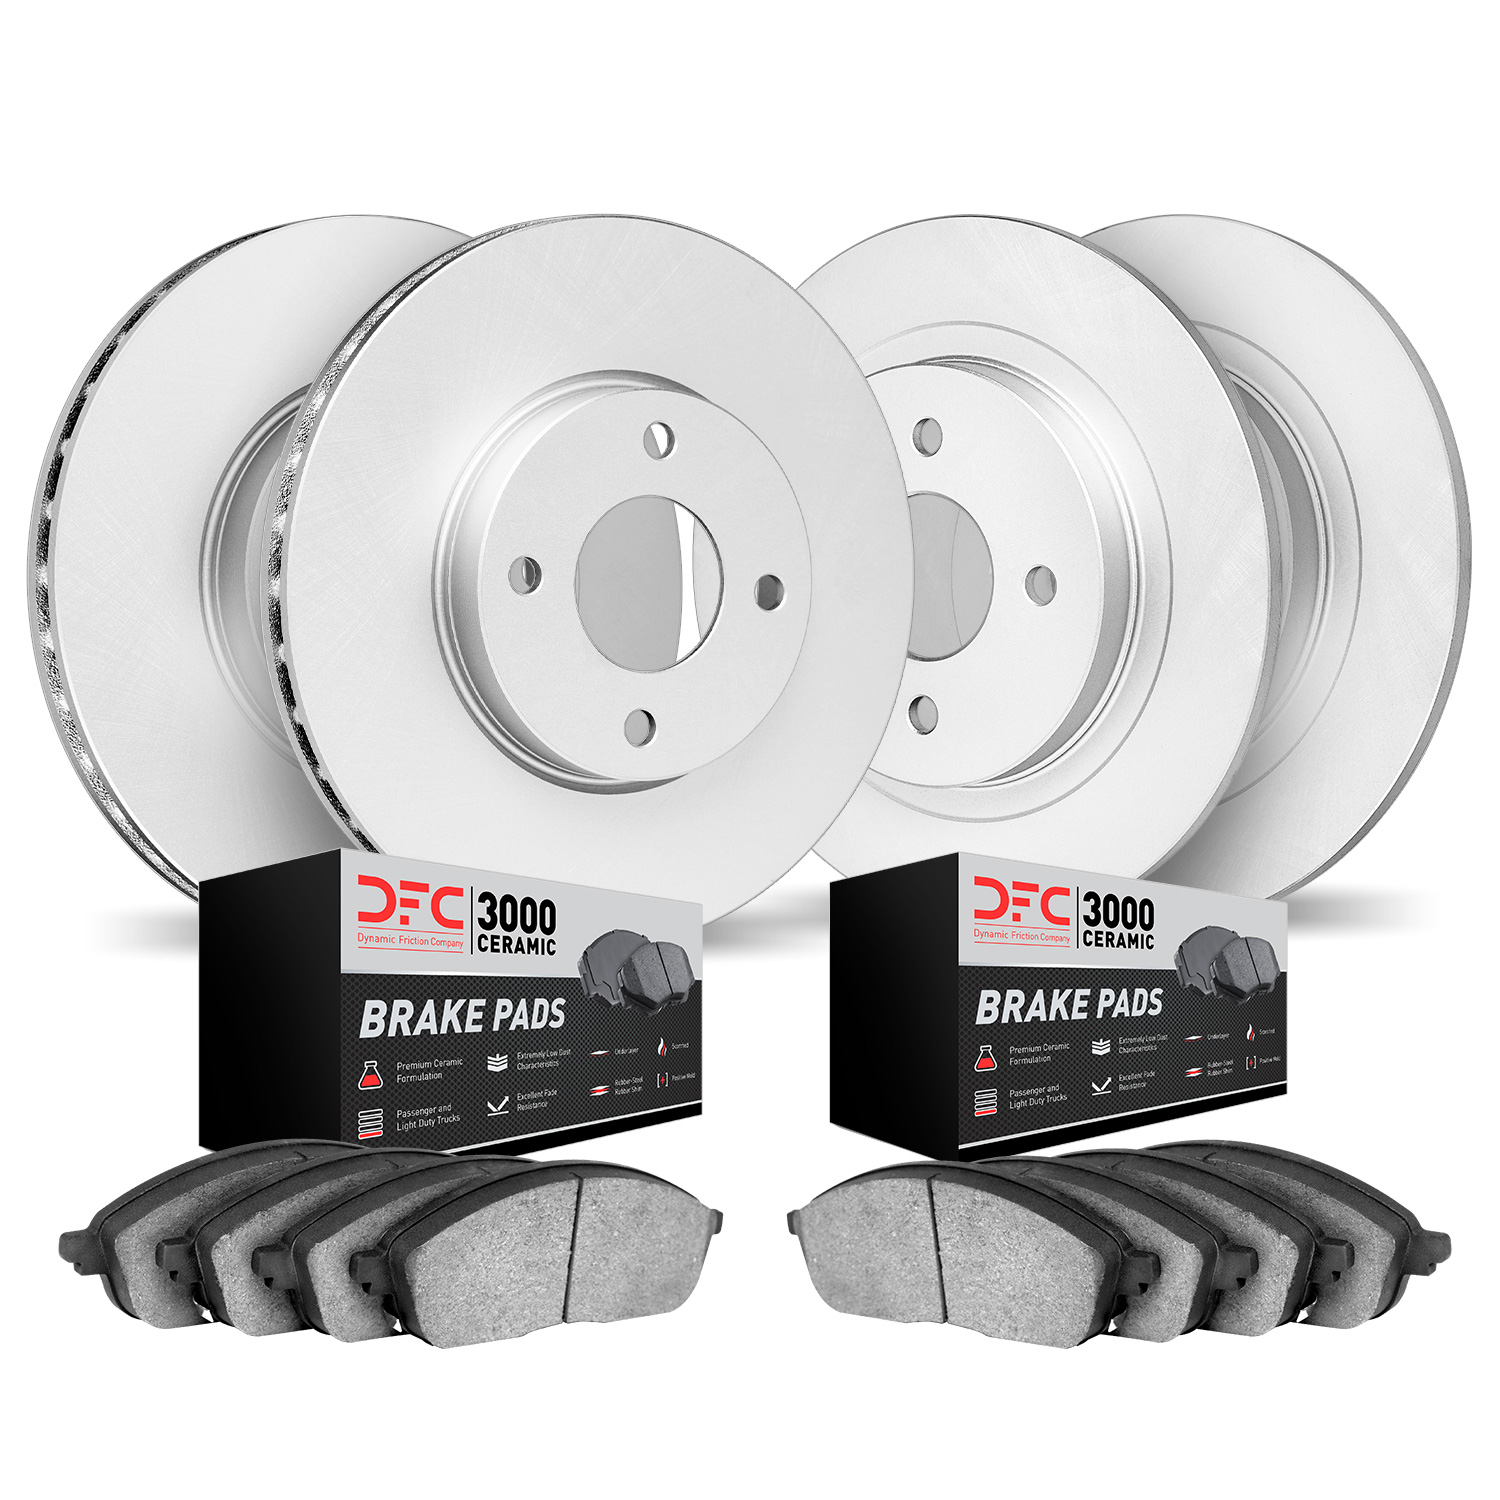 4304-67007 Geospec Brake Rotors with 3000-Series Ceramic Brake Pads Kit, 1990-1992 Infiniti/Nissan, Position: Front and Rear